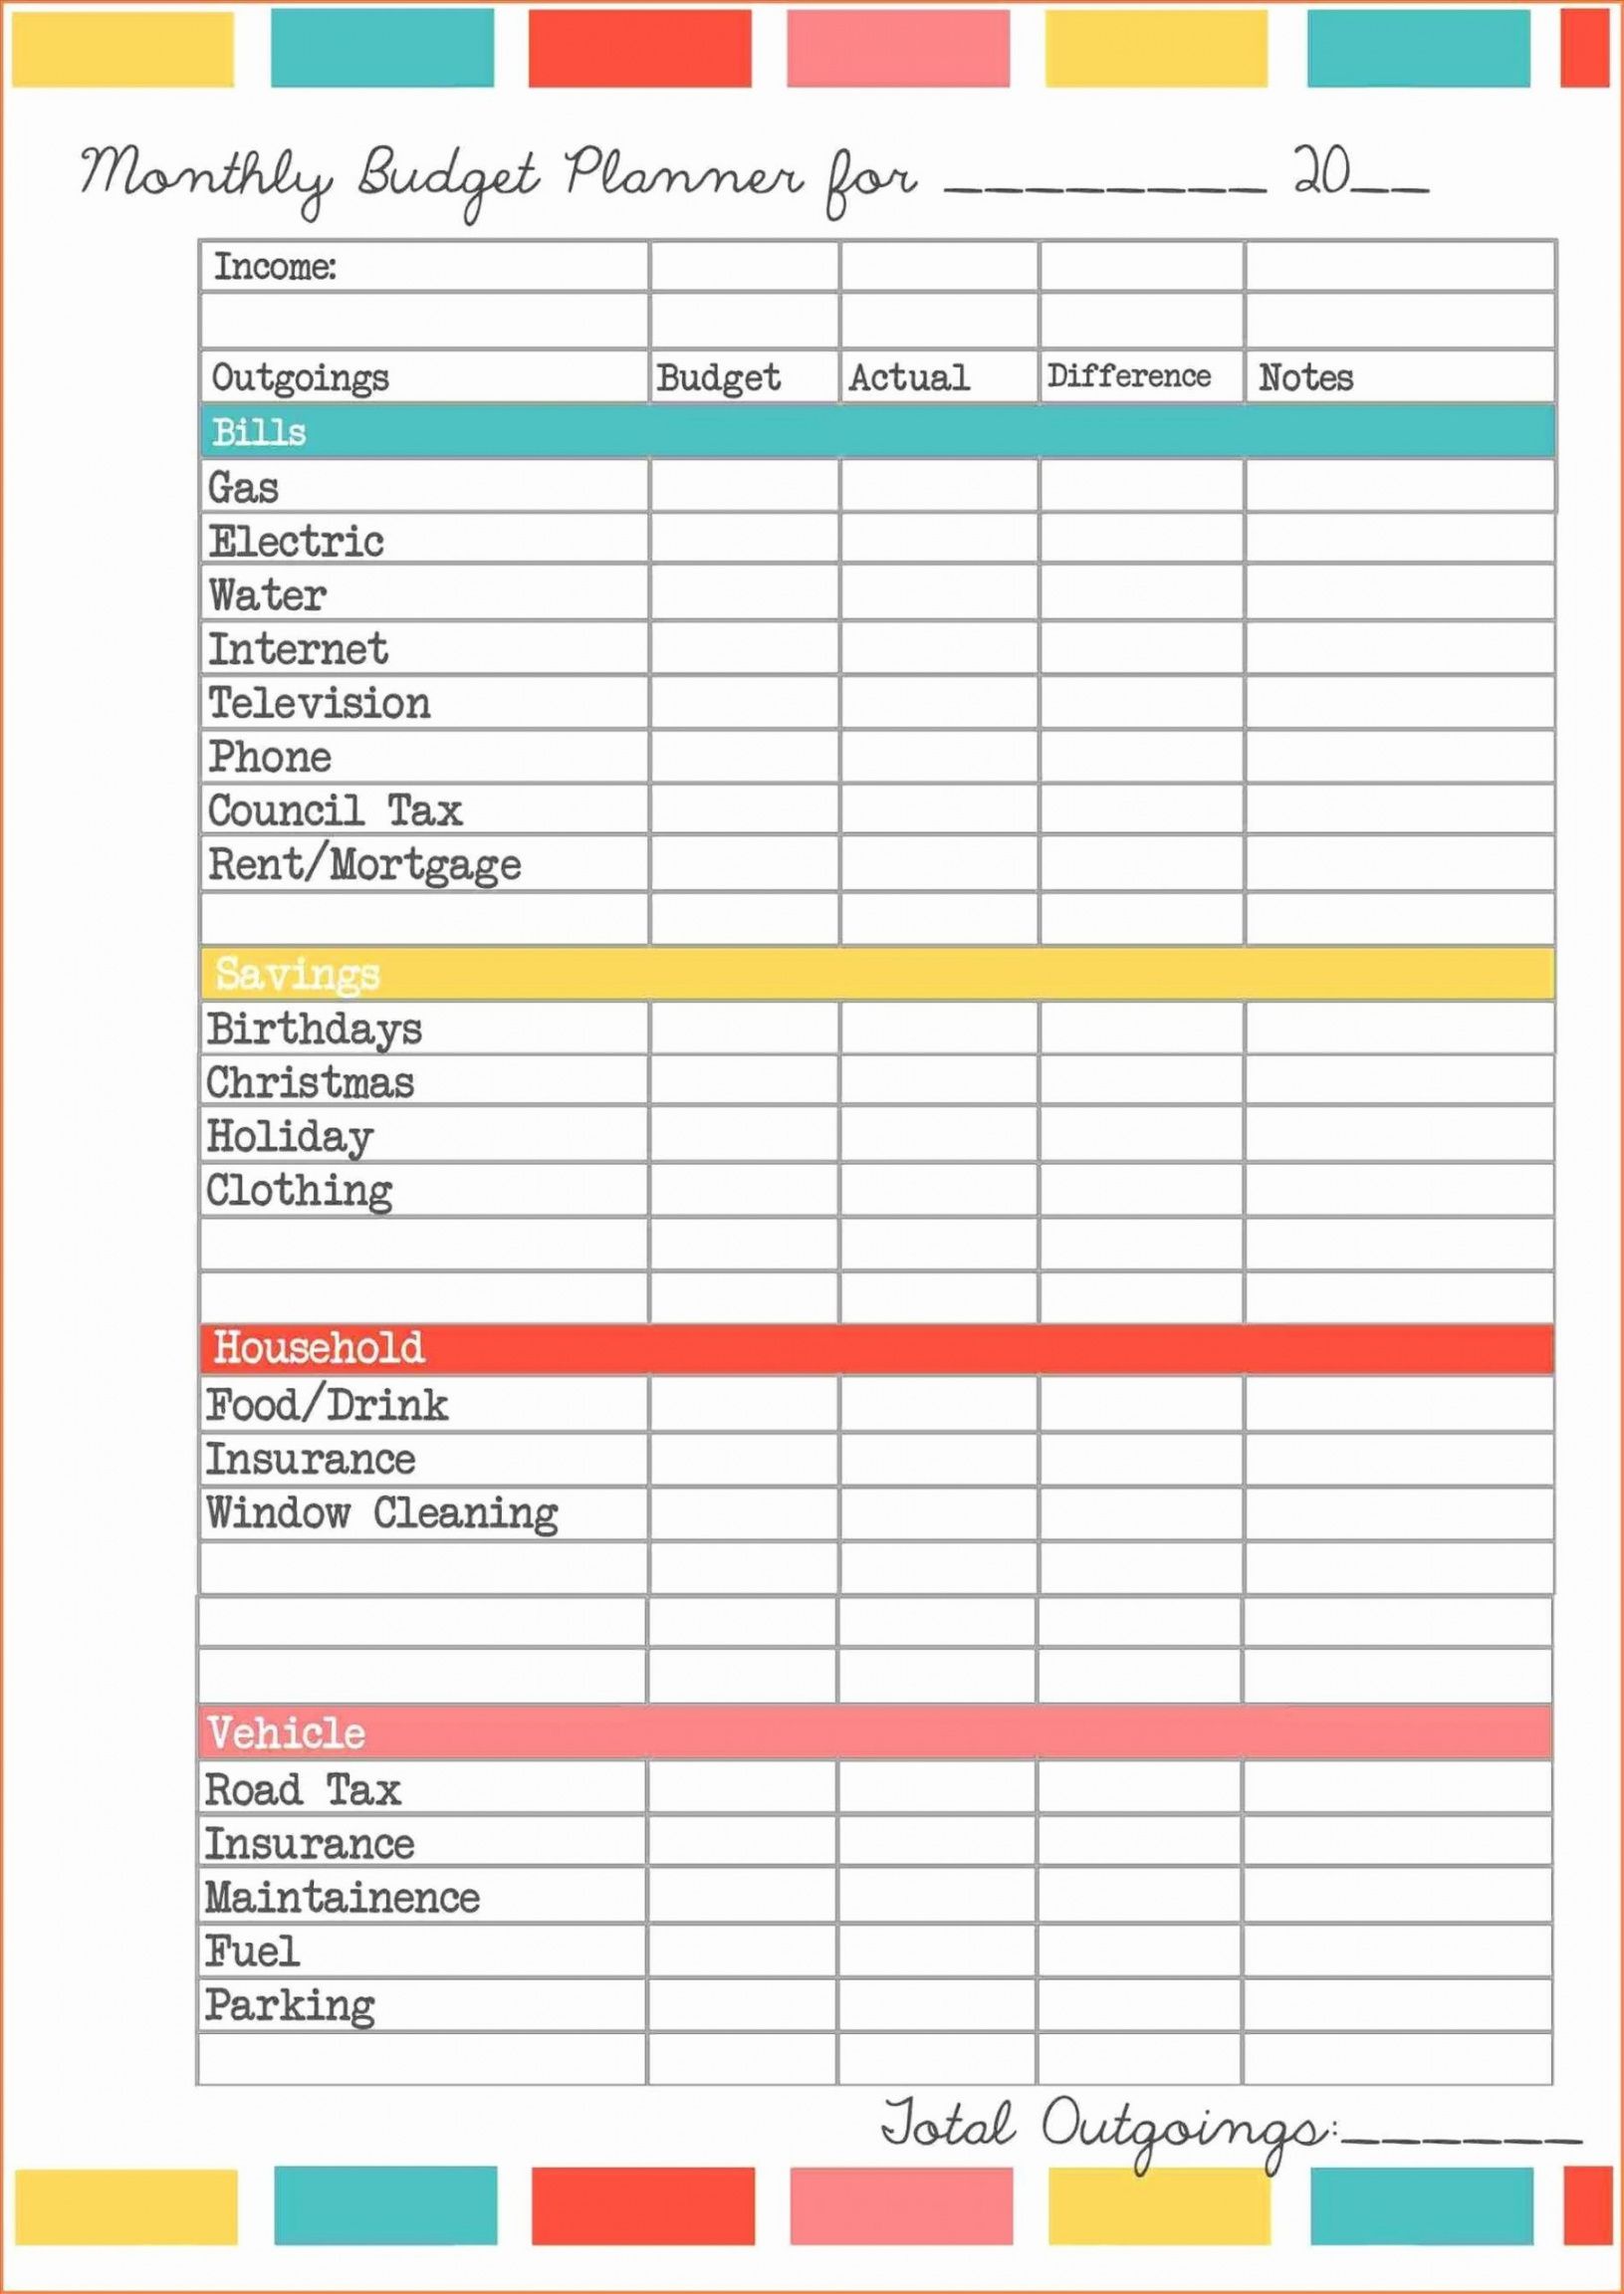 free spreadsheet income and expenses small business ands sample balance sheet budget template pdf